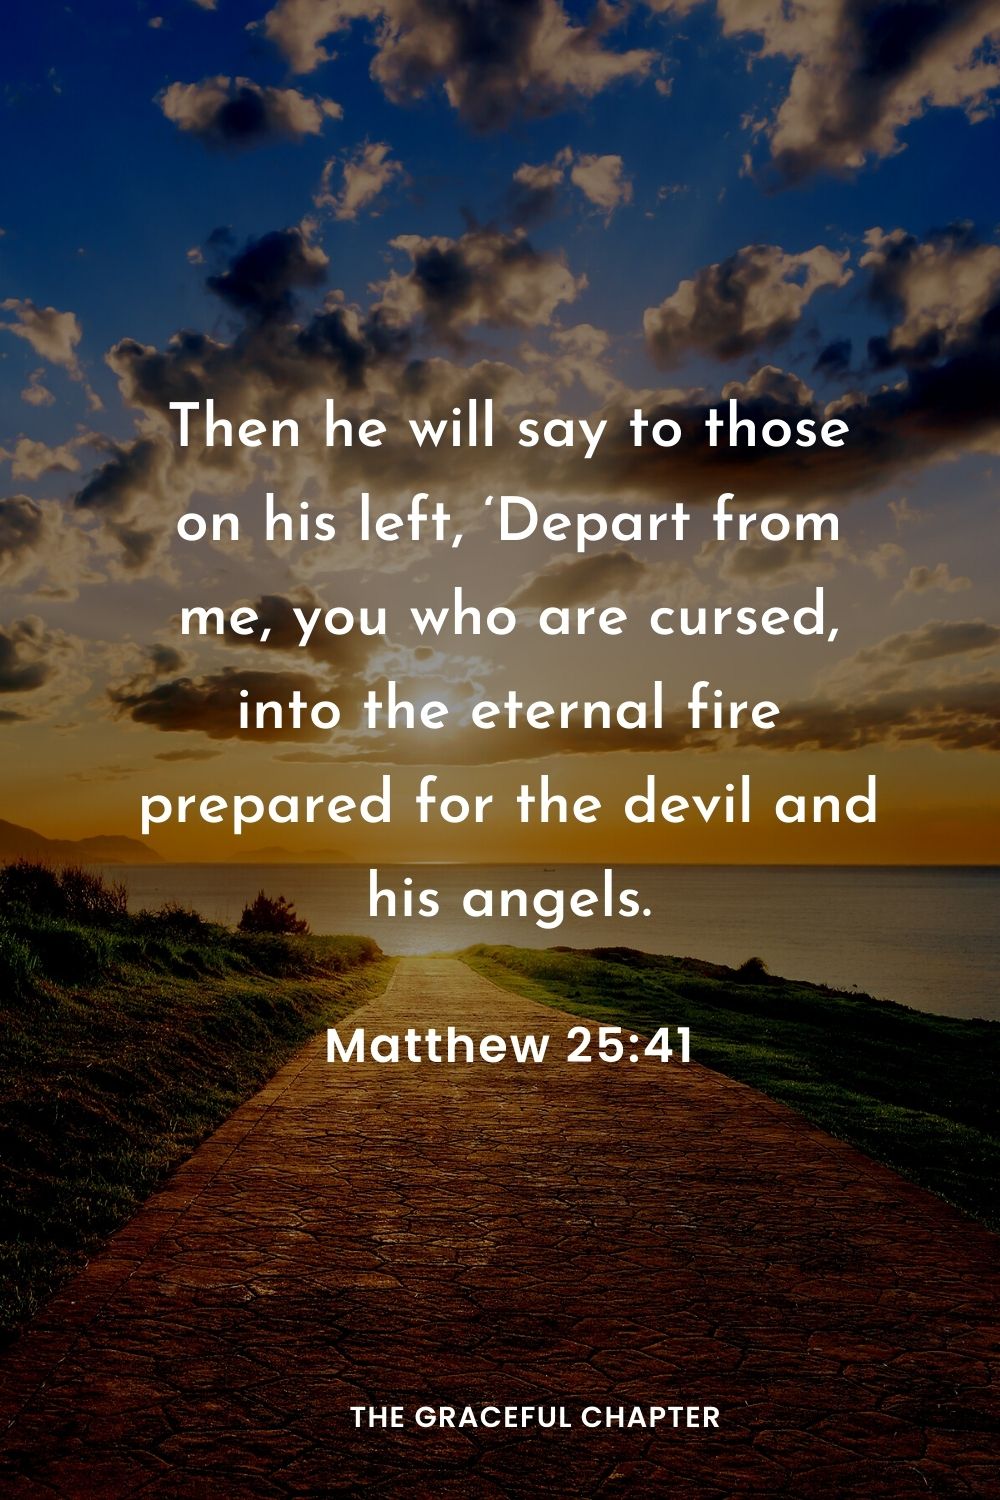 Then he will say to those on his left, ‘Depart from me, you who are cursed, into the eternal fire prepared for the devil and his angels.